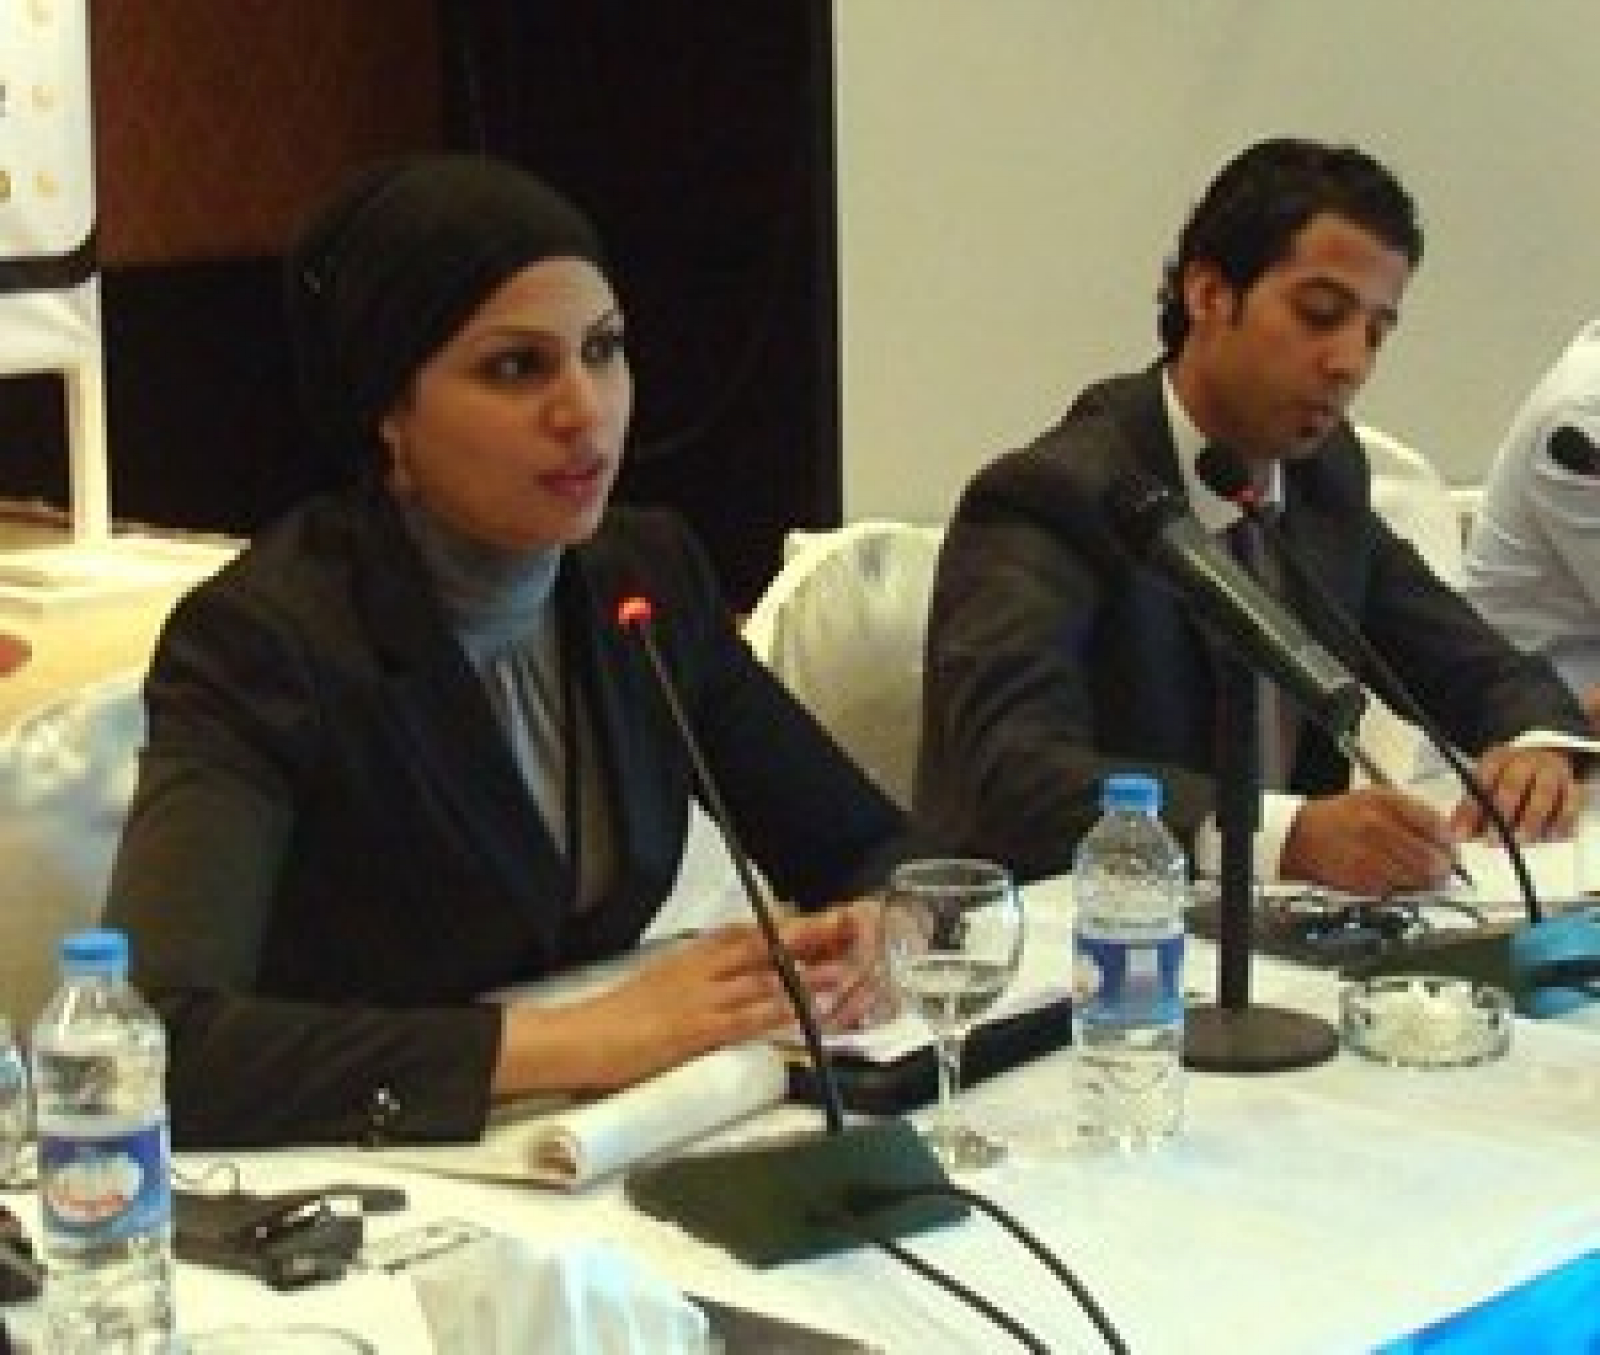 Iraqi National Youth Caucus Works to Turn Youth Priority Issues into Policy Changes